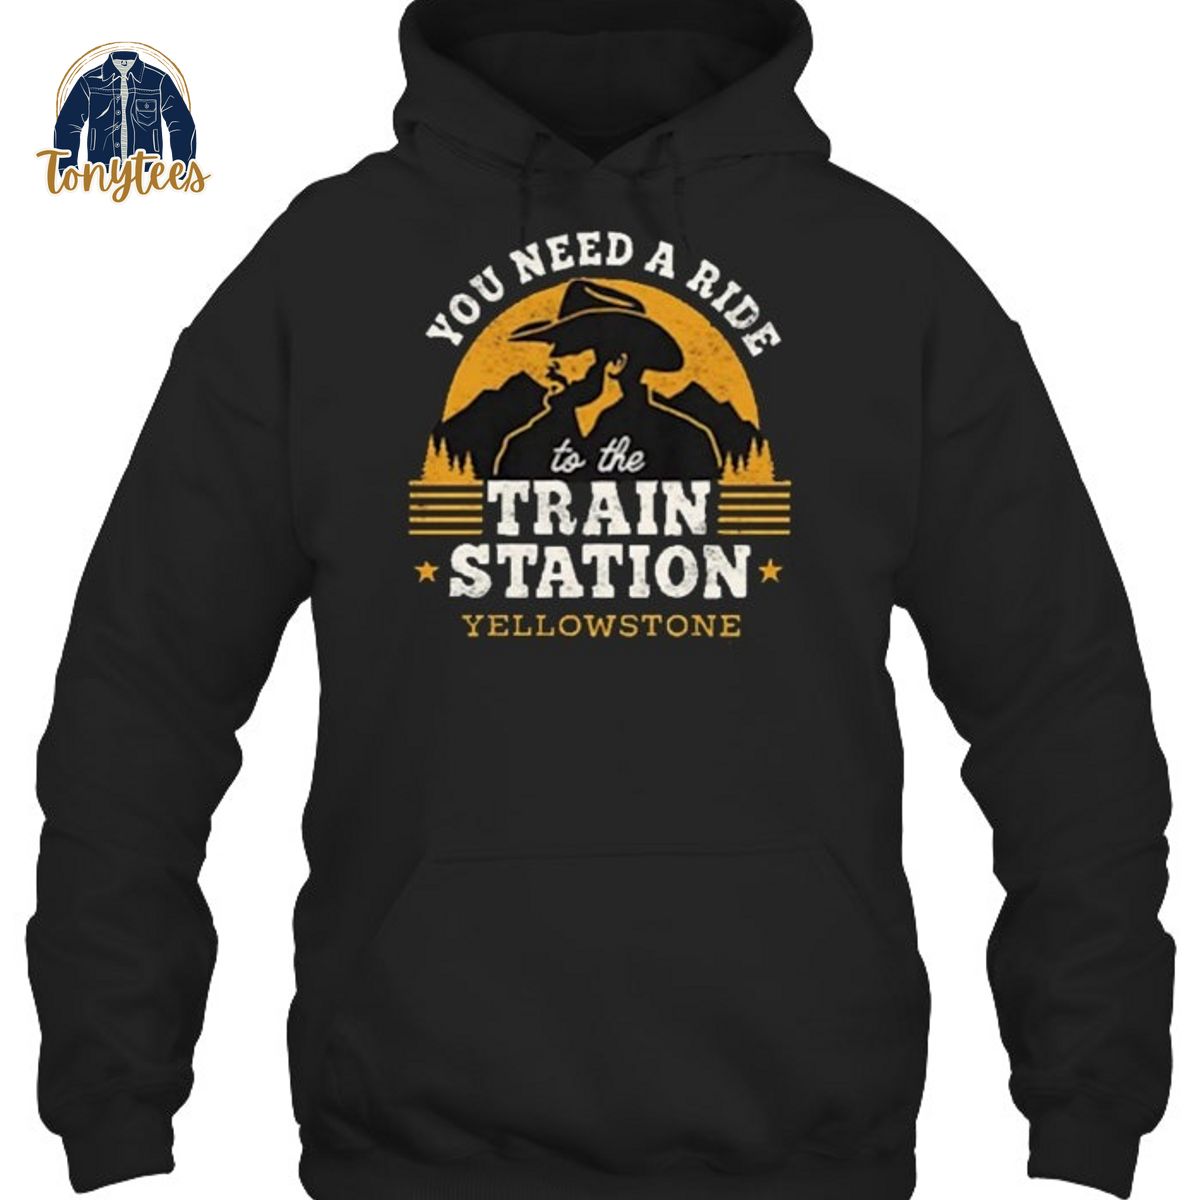 You need a ride to the train station Yellowstone shirt